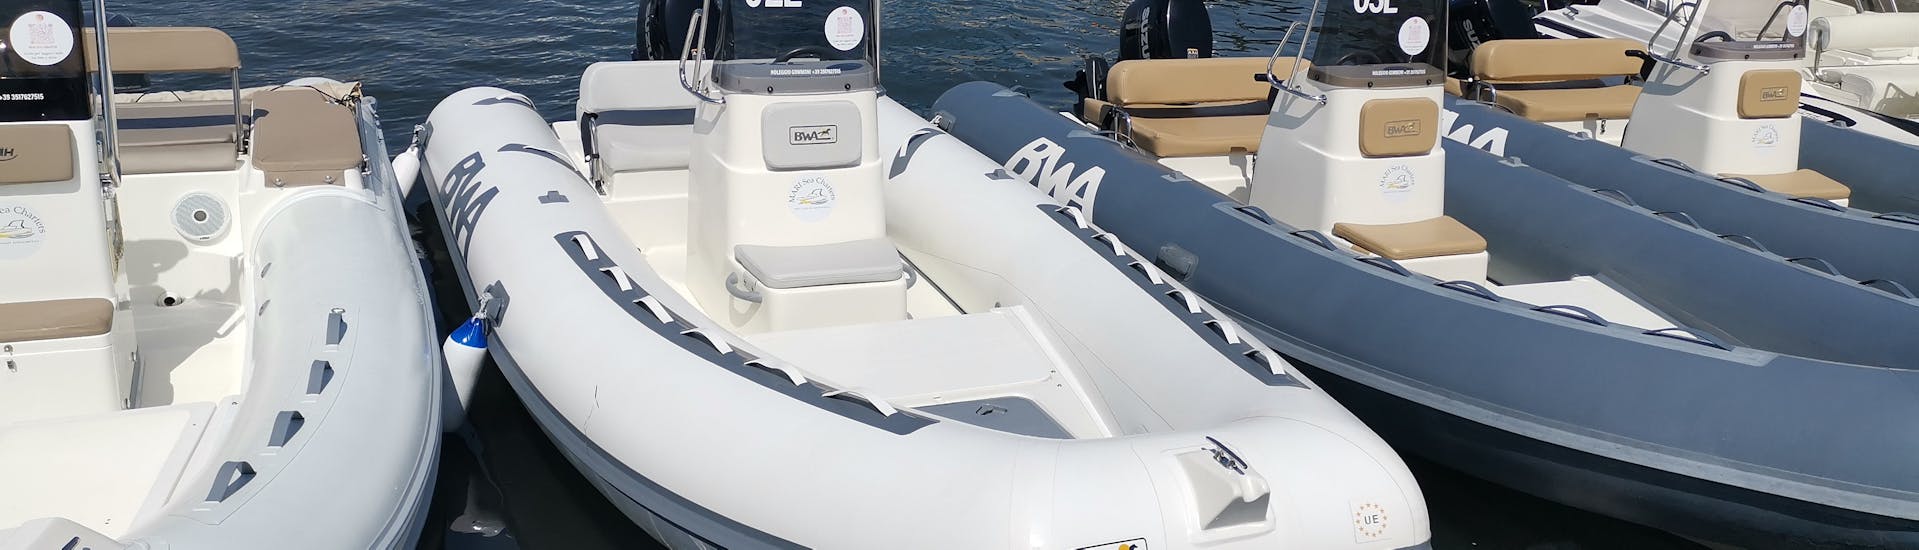 Boat from the RIB Boat Rental in Olbia (up to 6 people) with MARI Sea Charters Olbia.